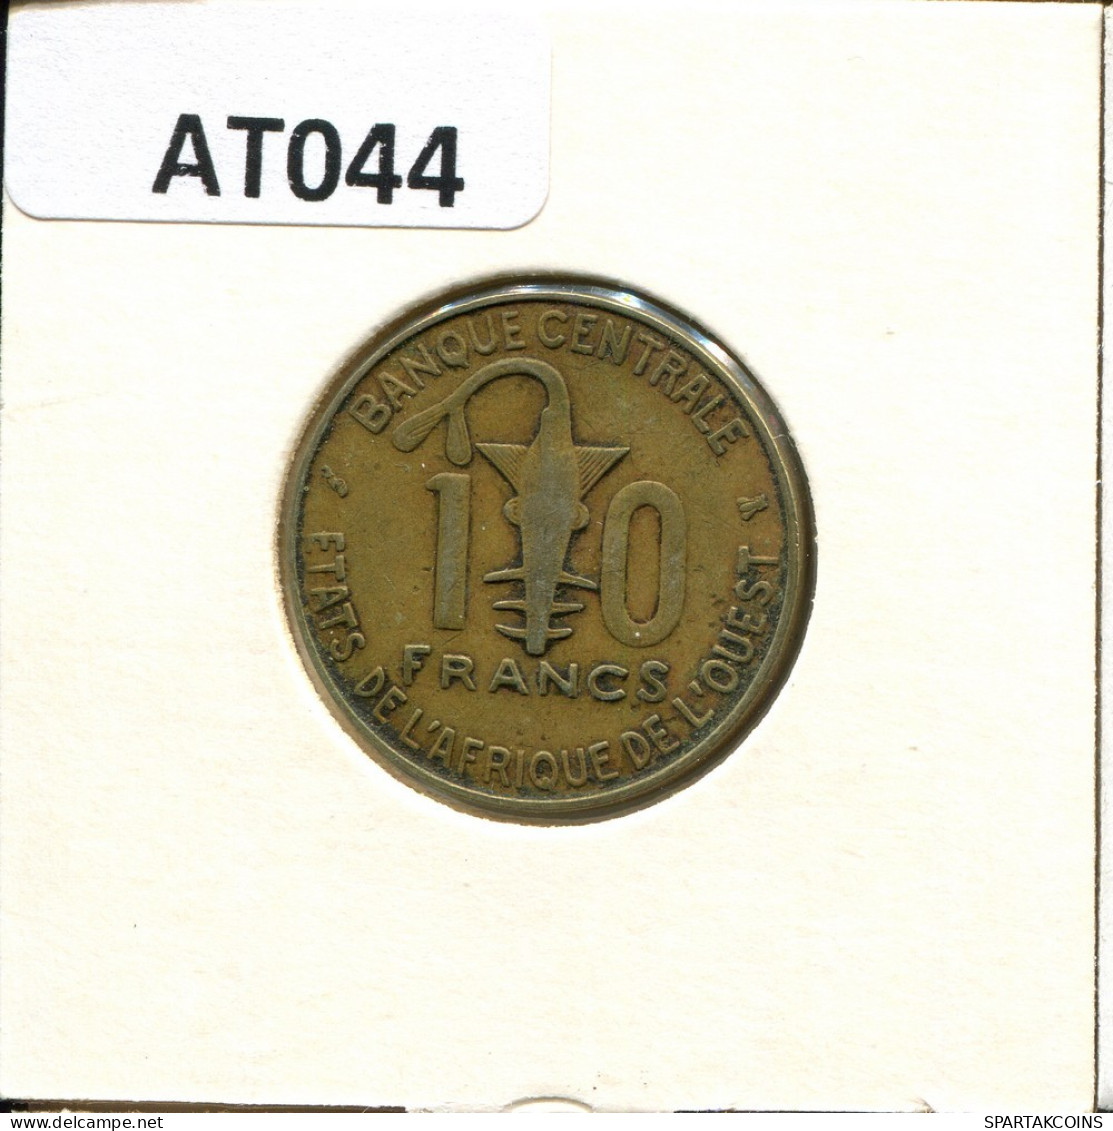 10 FRANCS CFA 1996 Western African States (BCEAO) Moneda #AT044.E.A - Other - Africa